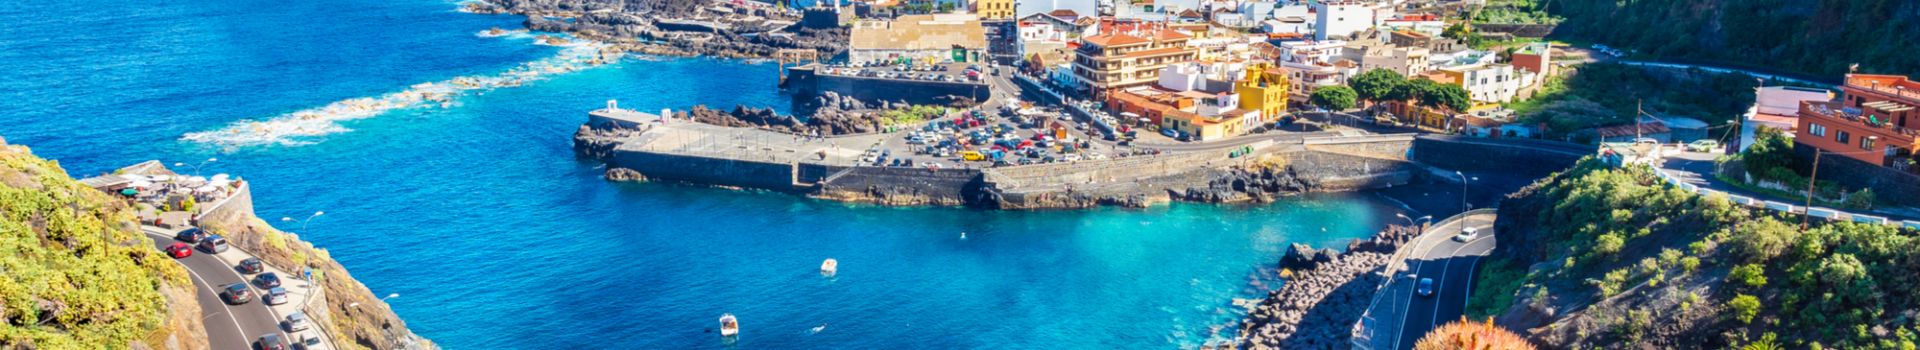 Cheap holidays to Tenerife from Belfast - Cassidy Travel